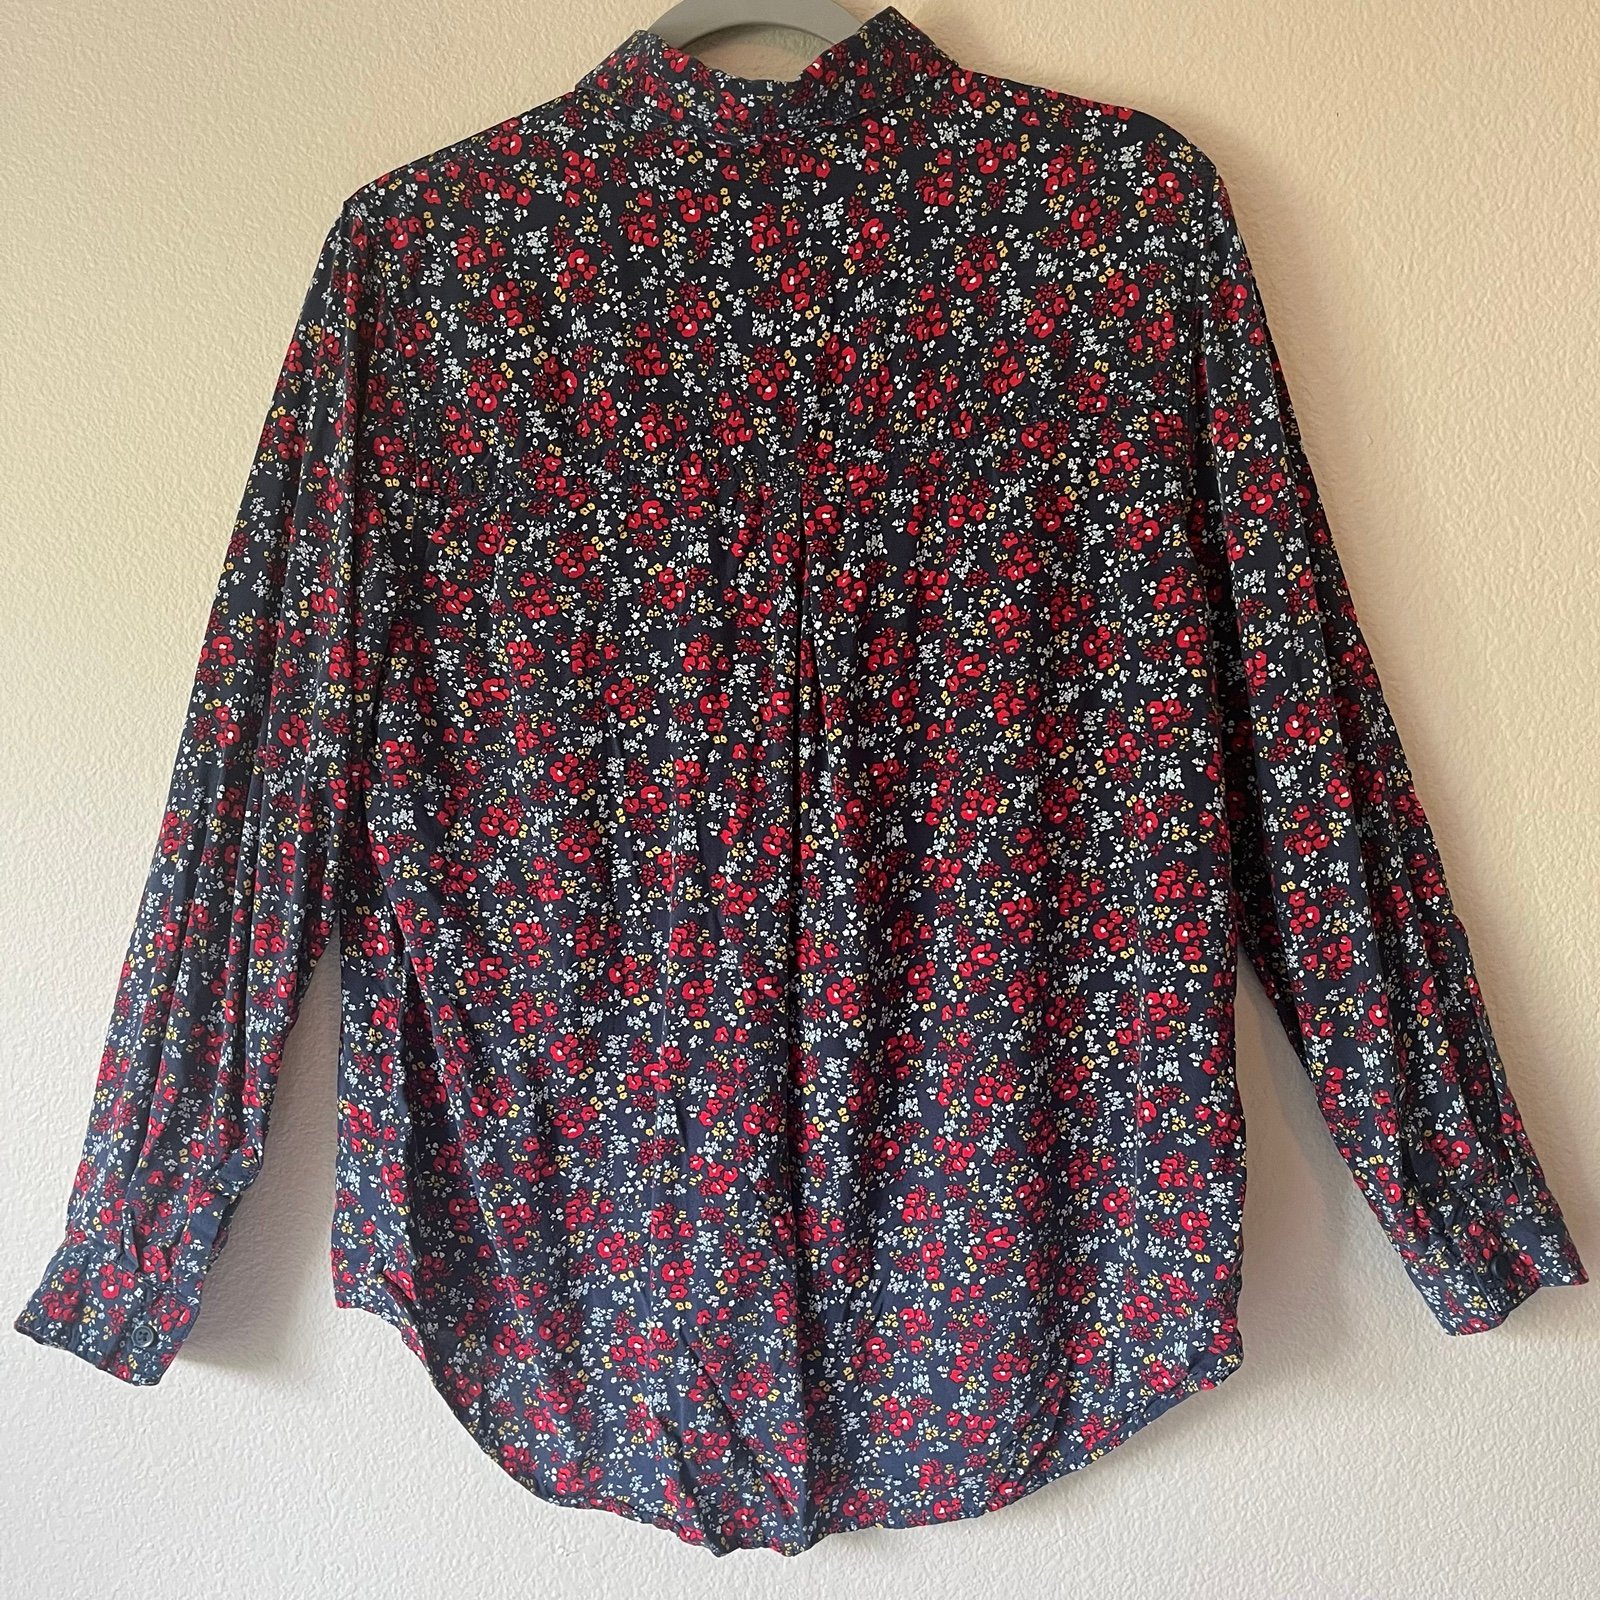 High quality BeachLunchLounge Floral Pattern Button Down Top Size Large os8kSkkiz Cheap